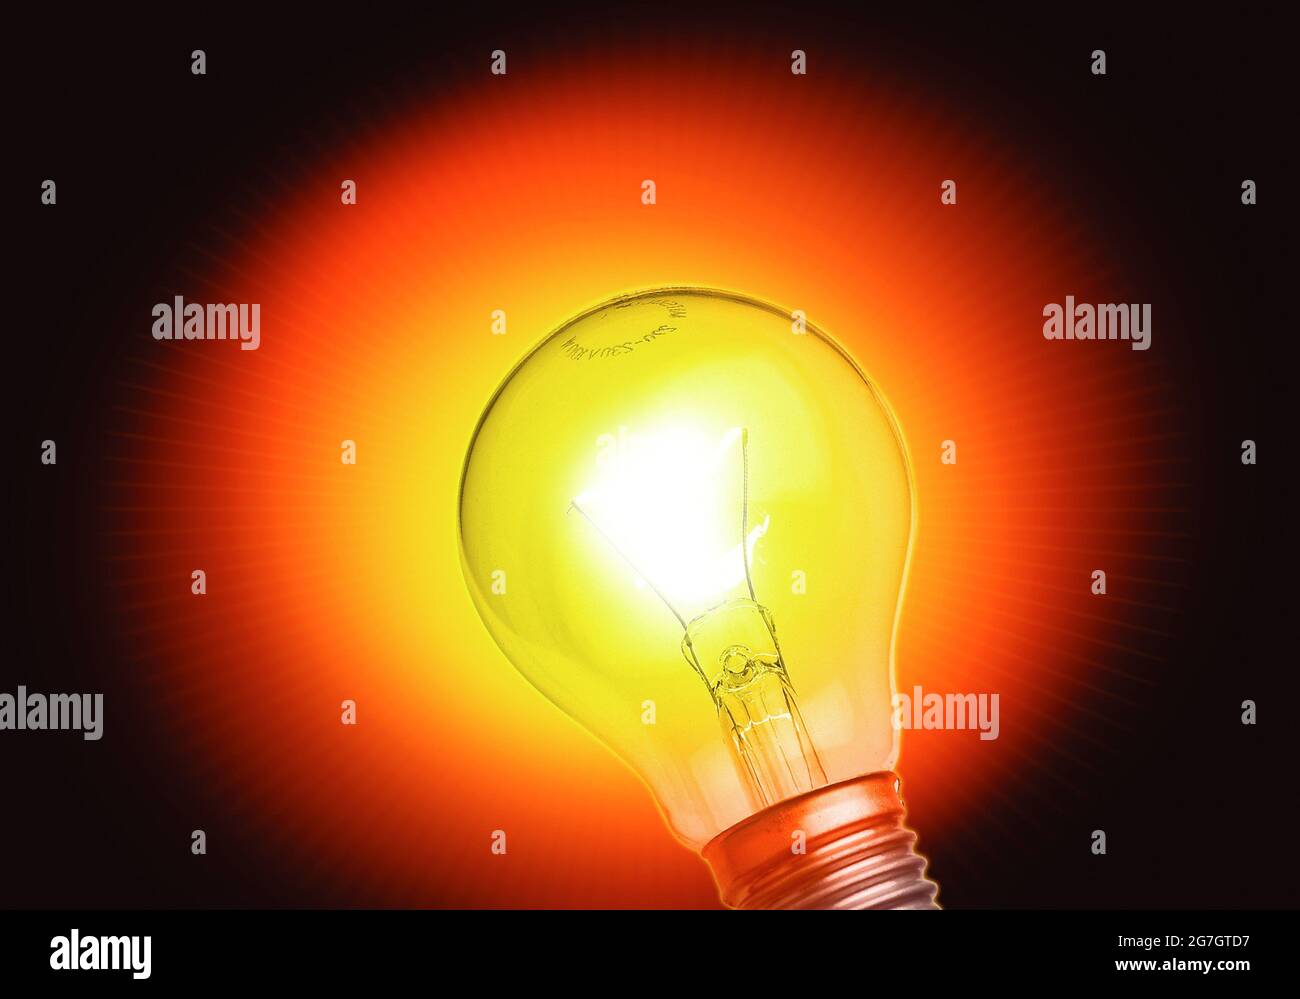 glowing incandescent light bulb Stock Photo